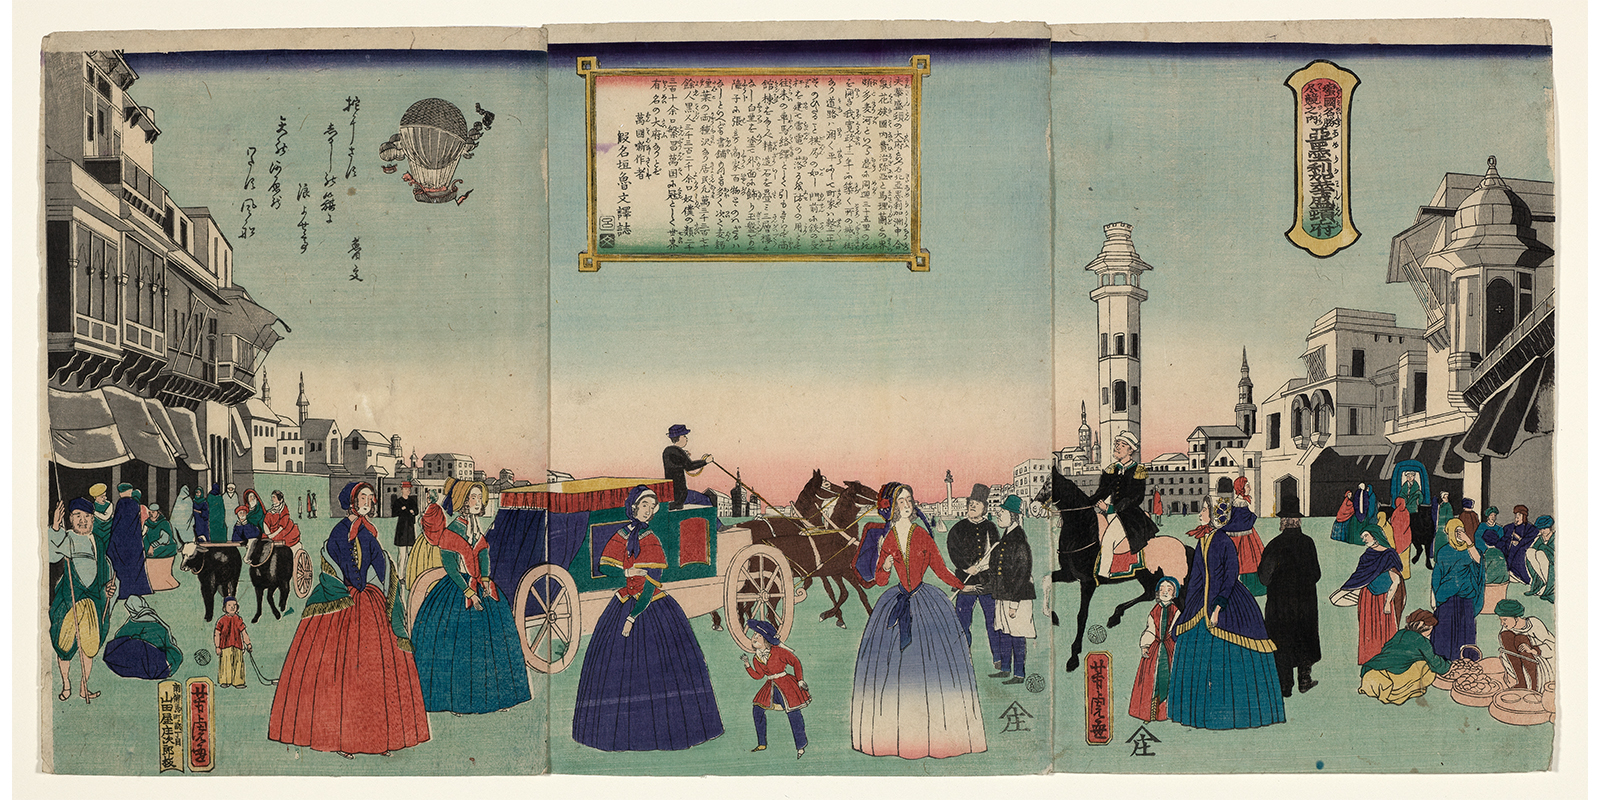 Three panel multi-color woodblock print of people dressed in 1800's clothes walking in the middle of the street with building on either side. Chinese lettering can be found in various spots of the print